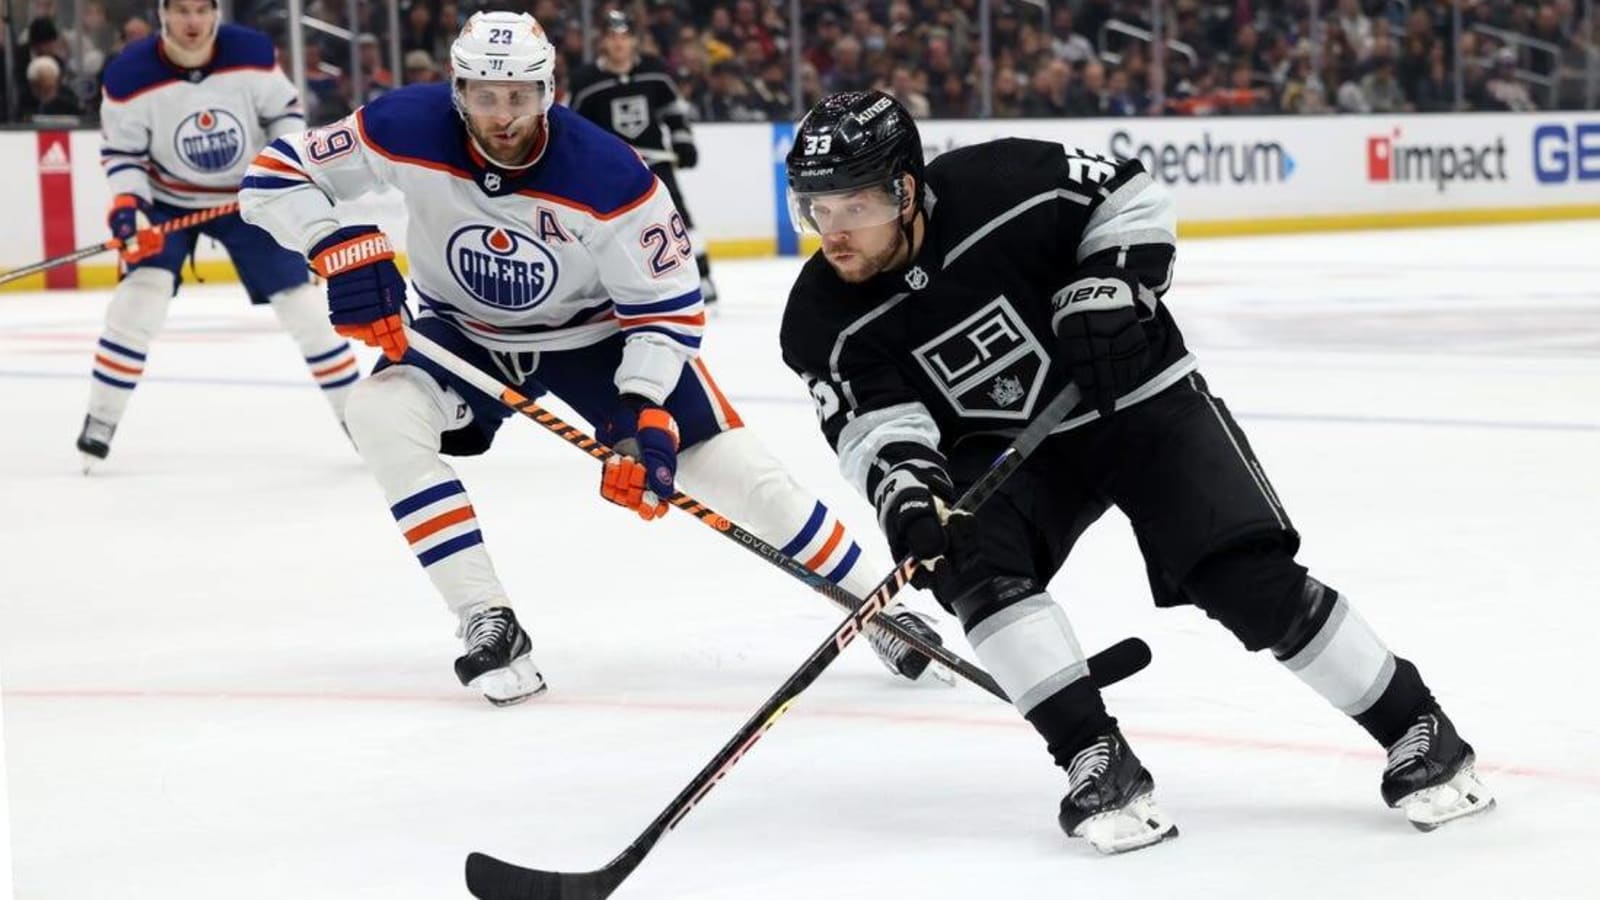 Kings use lethal power play to take down Oilers